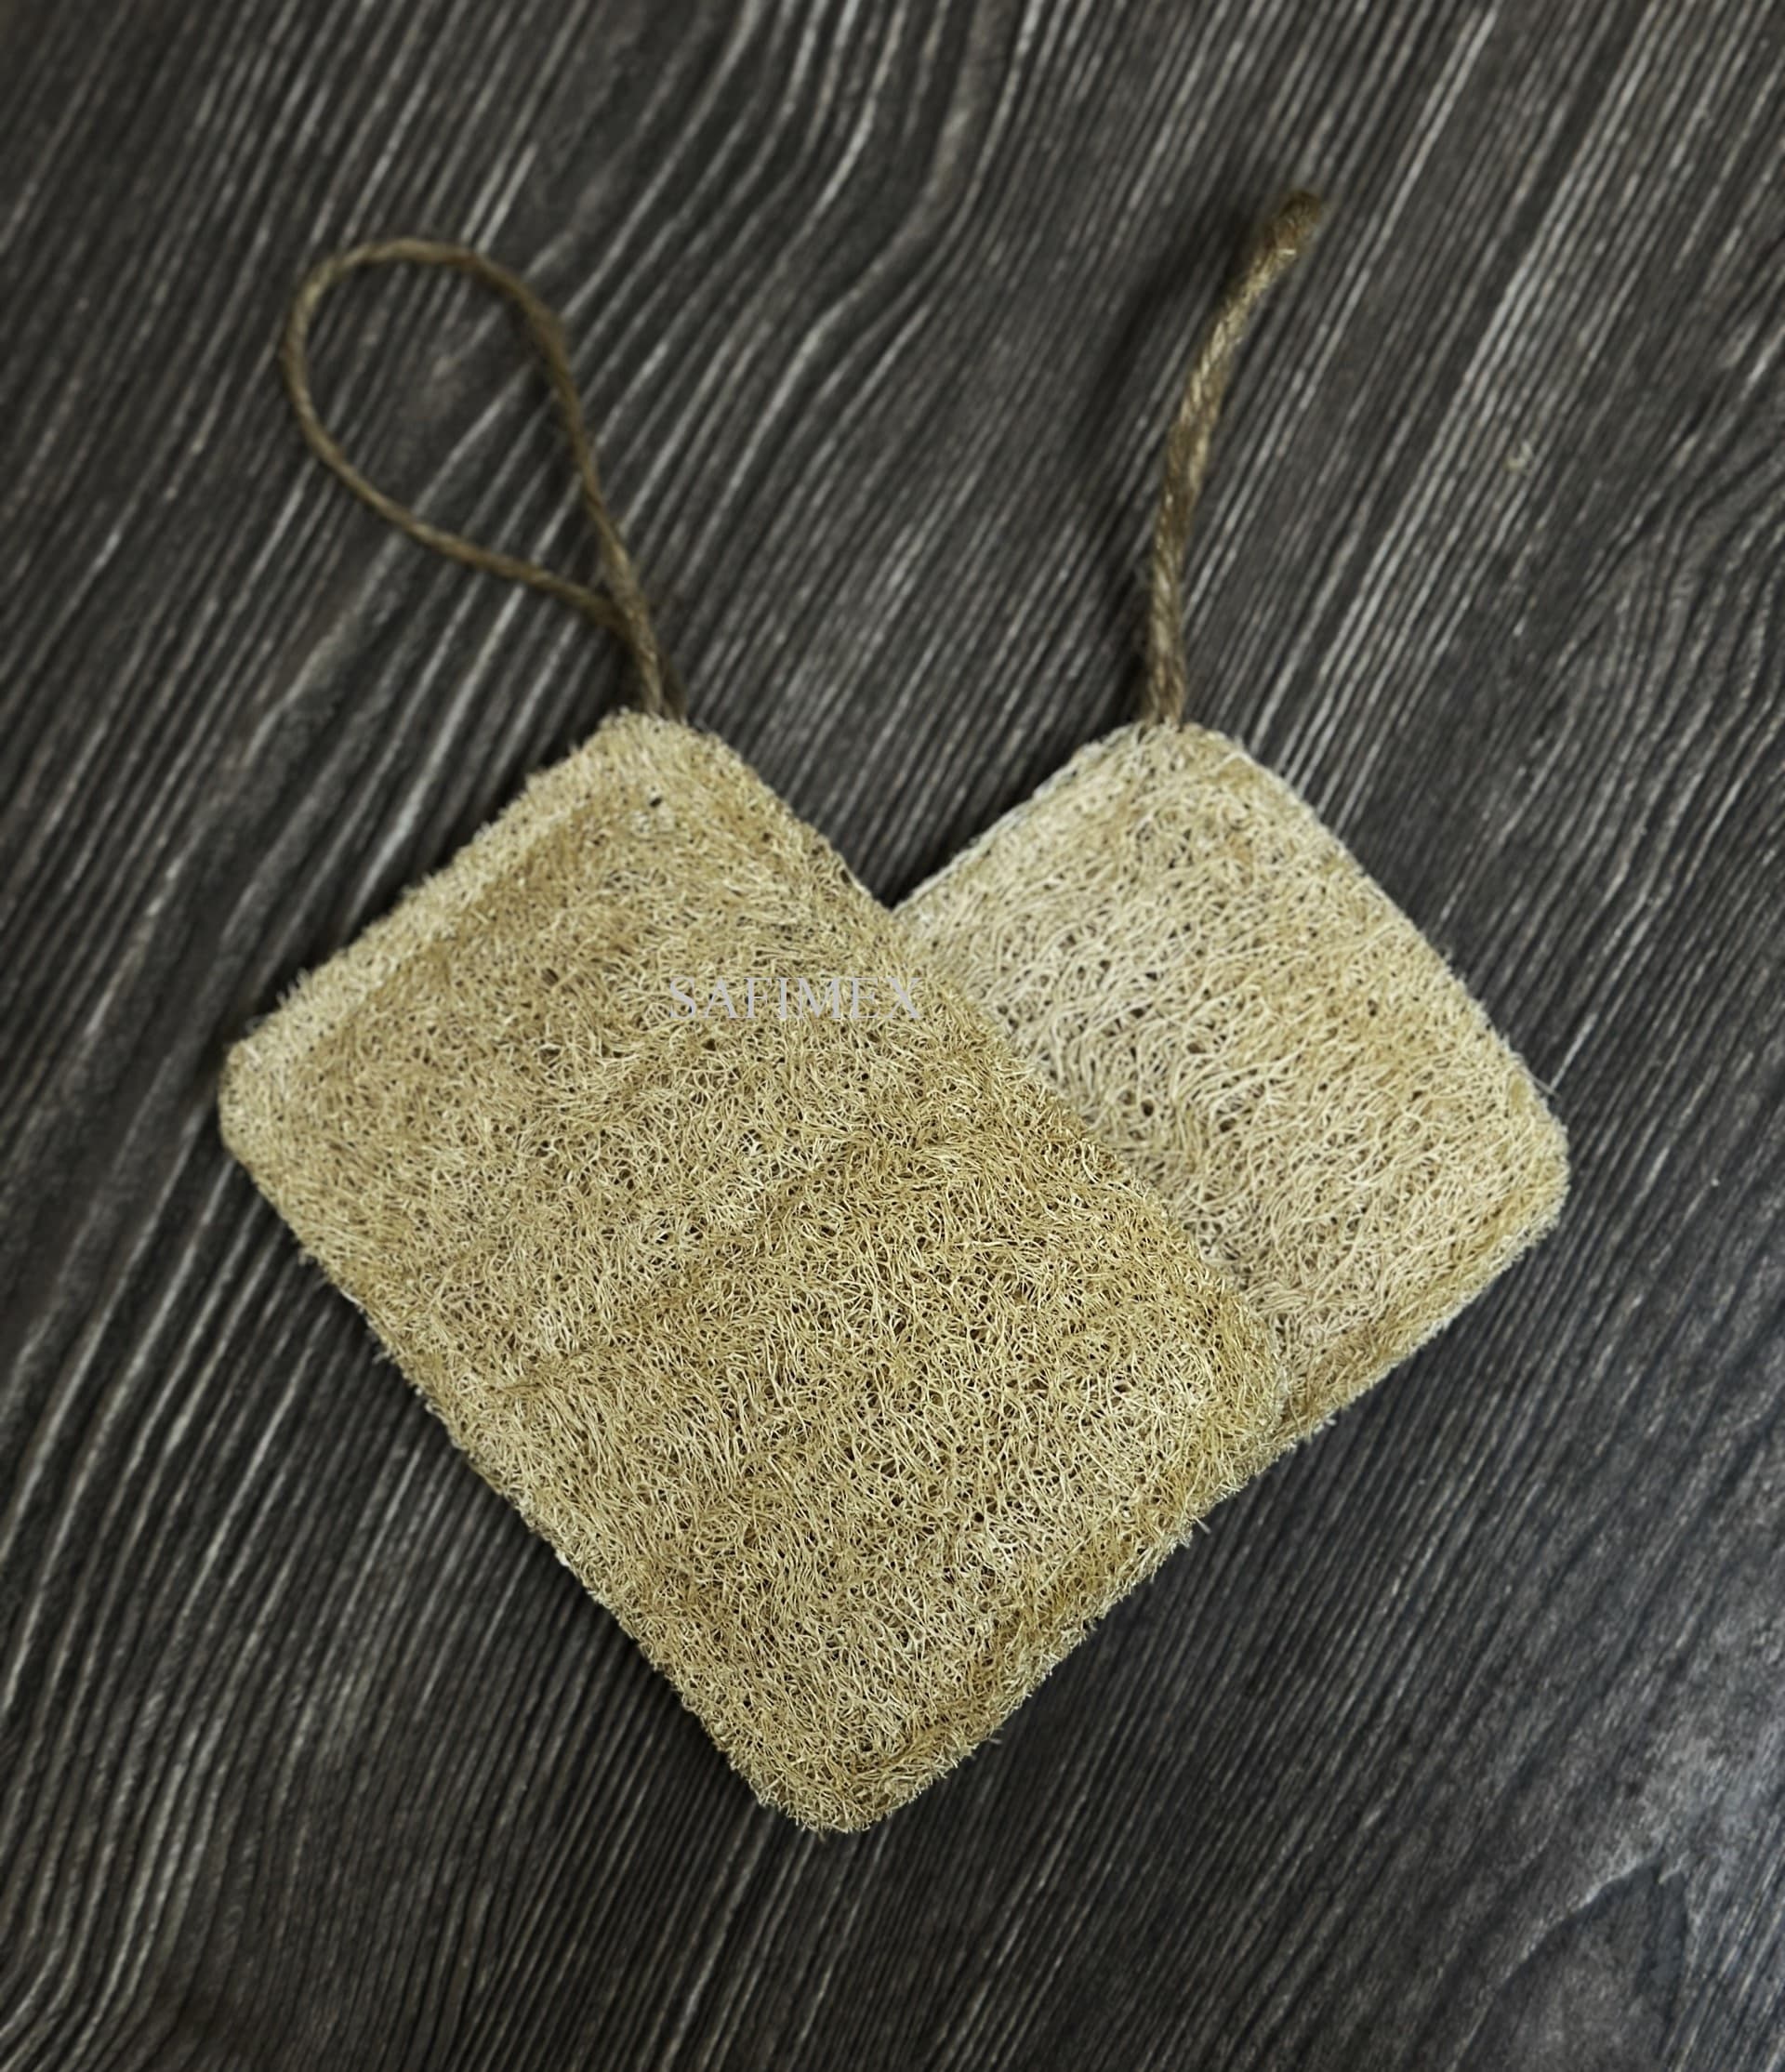 Natural loofah pads sponge use for kitchen dish washing high quality from Vietnam with OEM packaging